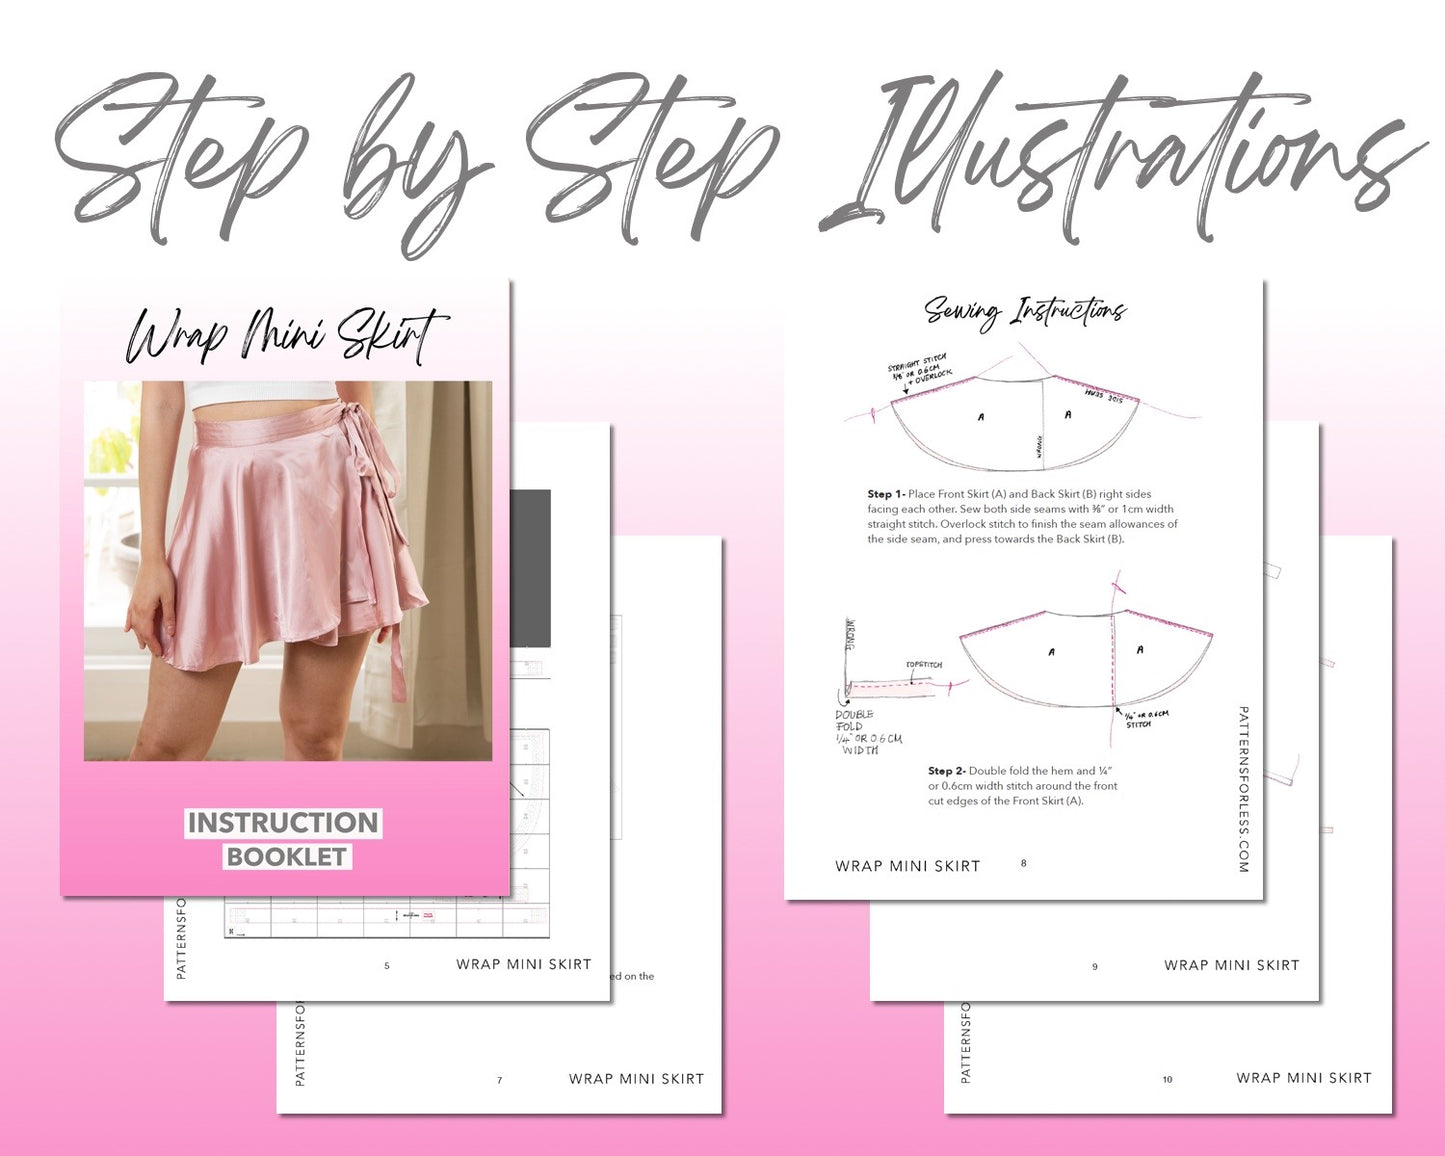 Wrap Mini Circle Skirt sewing pattern step by step illustrations.